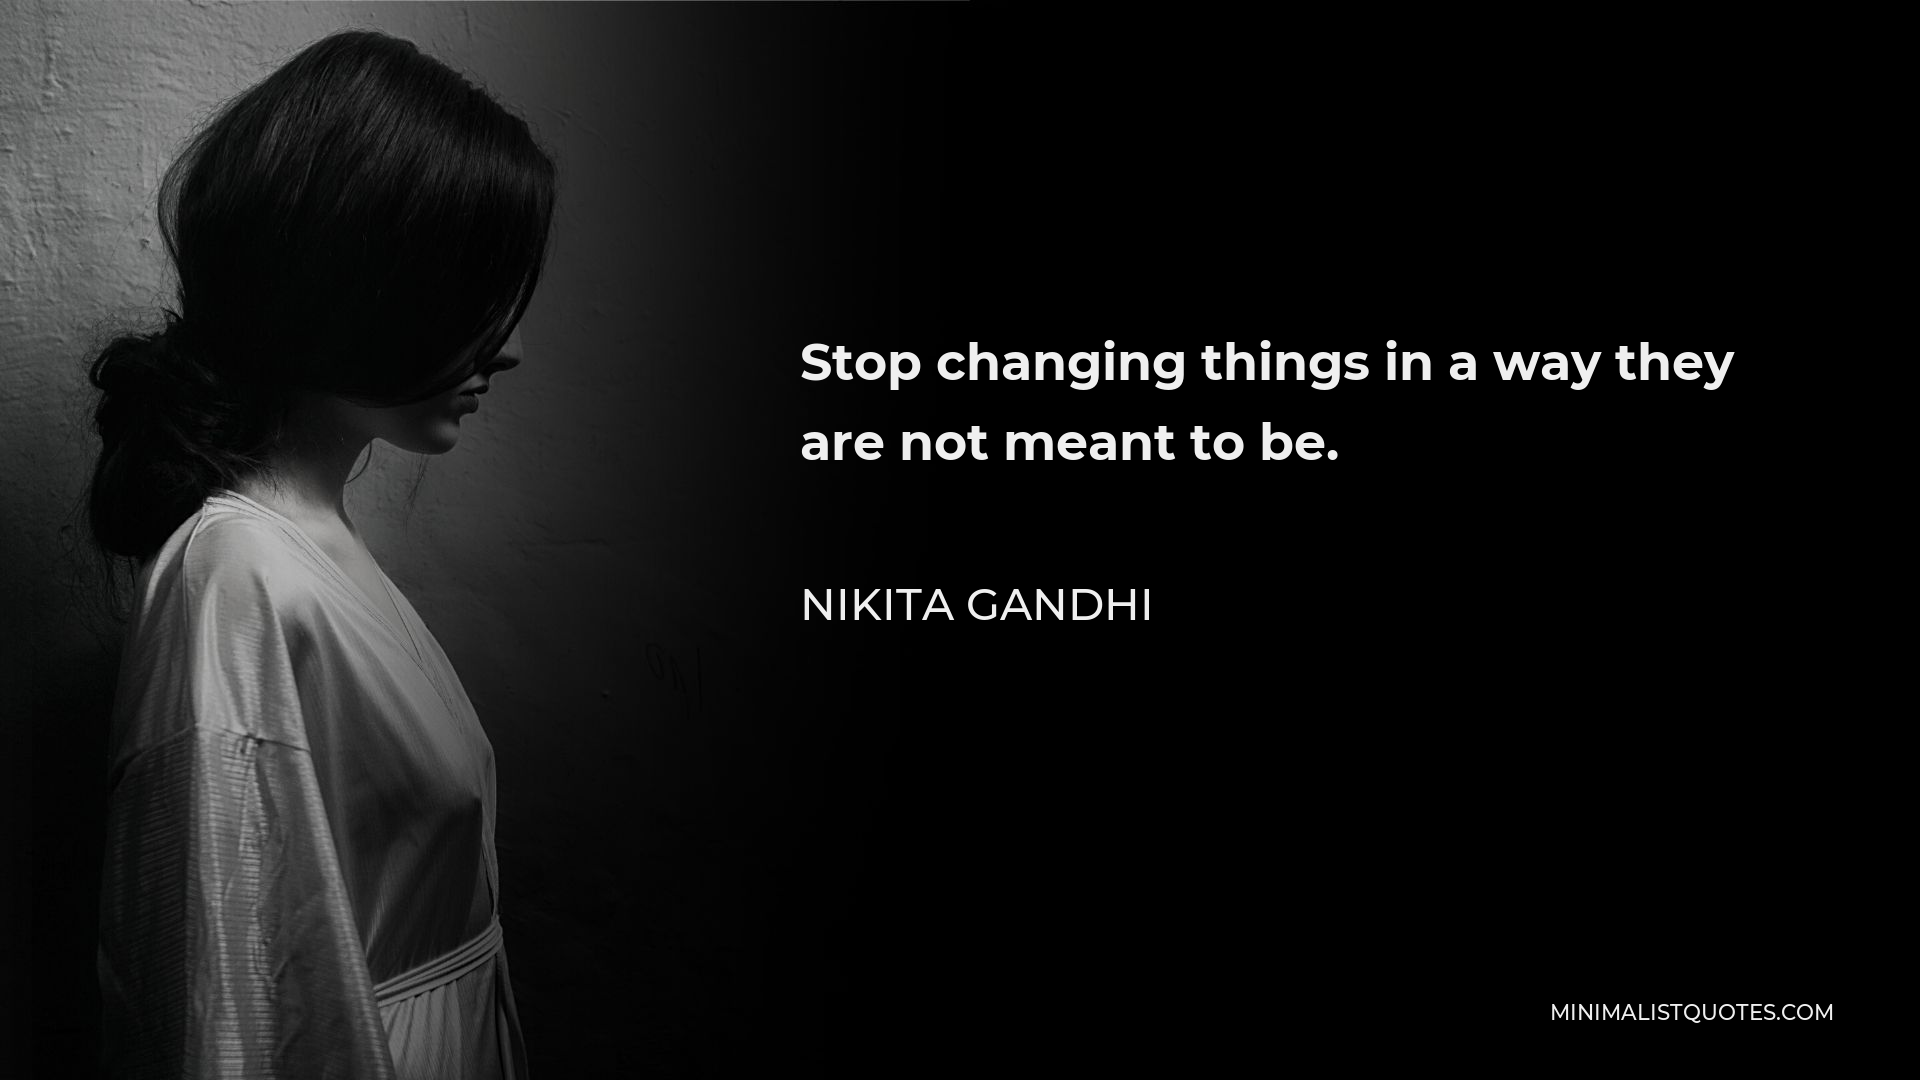 Nikita Gandhi Quote - Stop changing things in a way they are not meant to be.